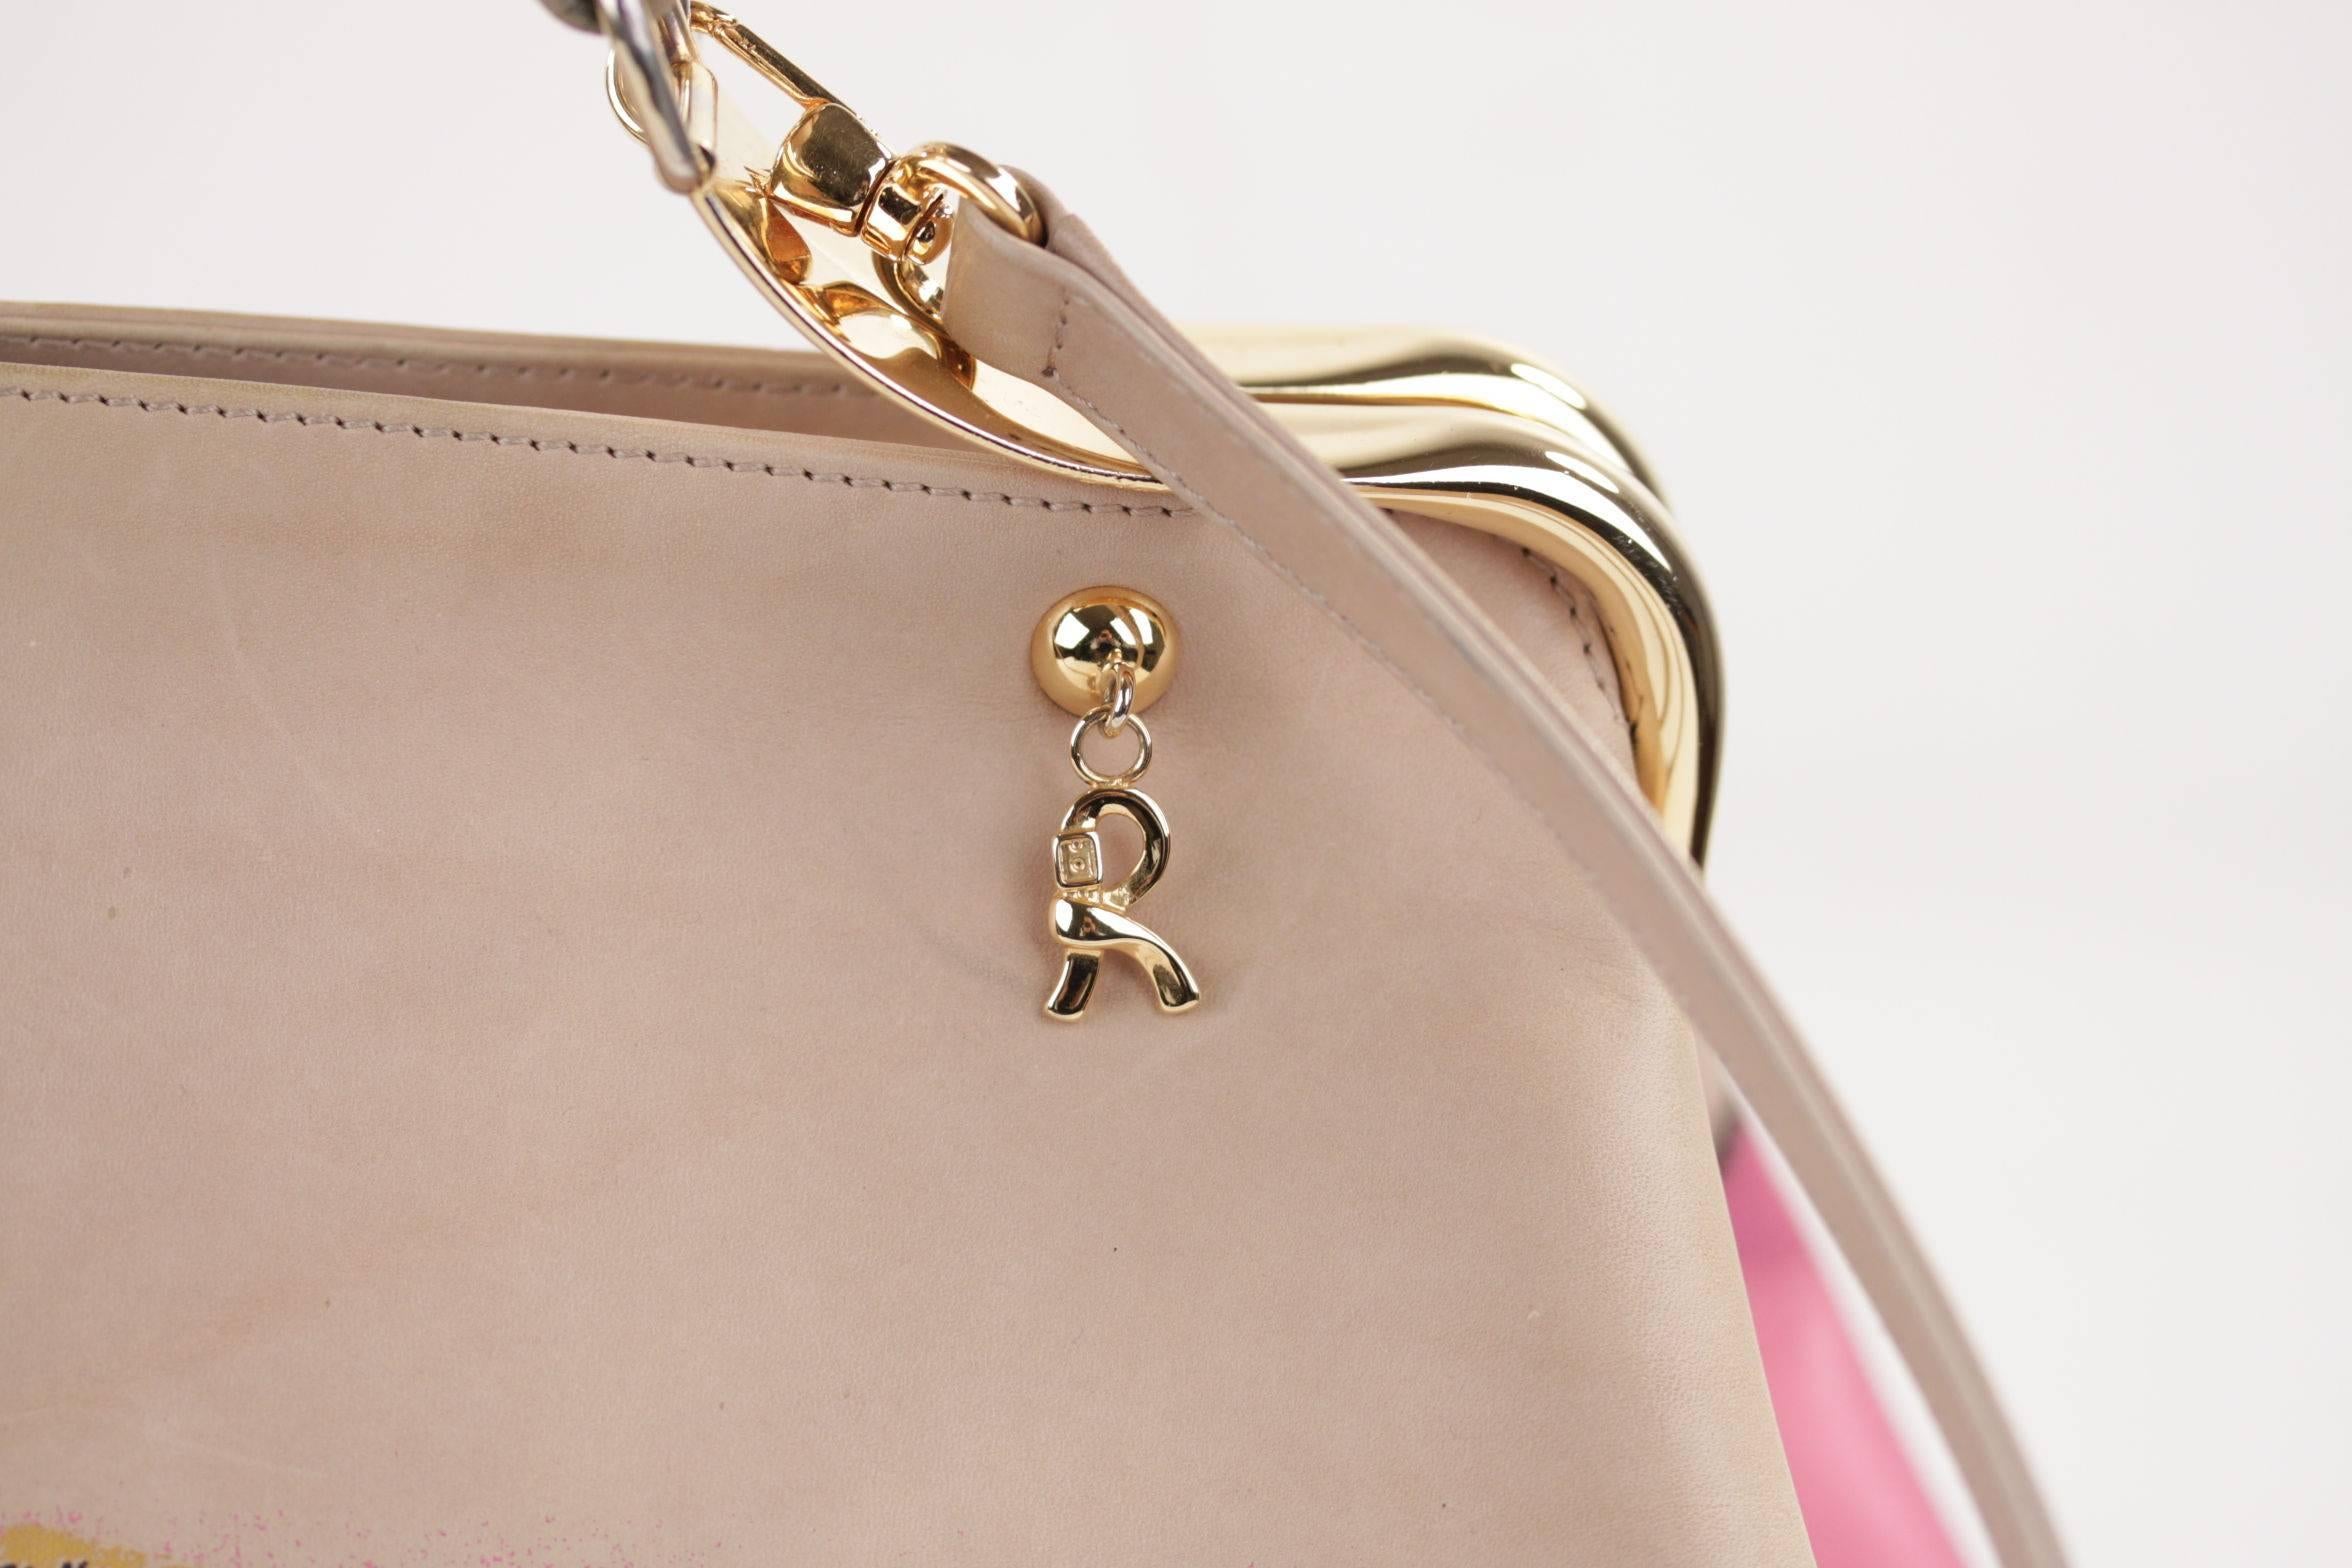  - ROBERTA DI CAMERINO beige leather doctor bag w/ Removable shoulder strap
- Pink belt detailing painted on leather
- Gold metal hardware
- Tiny gold metal‘R’ hanging from a stud on the front and on the back of the bag
- The interior is beige